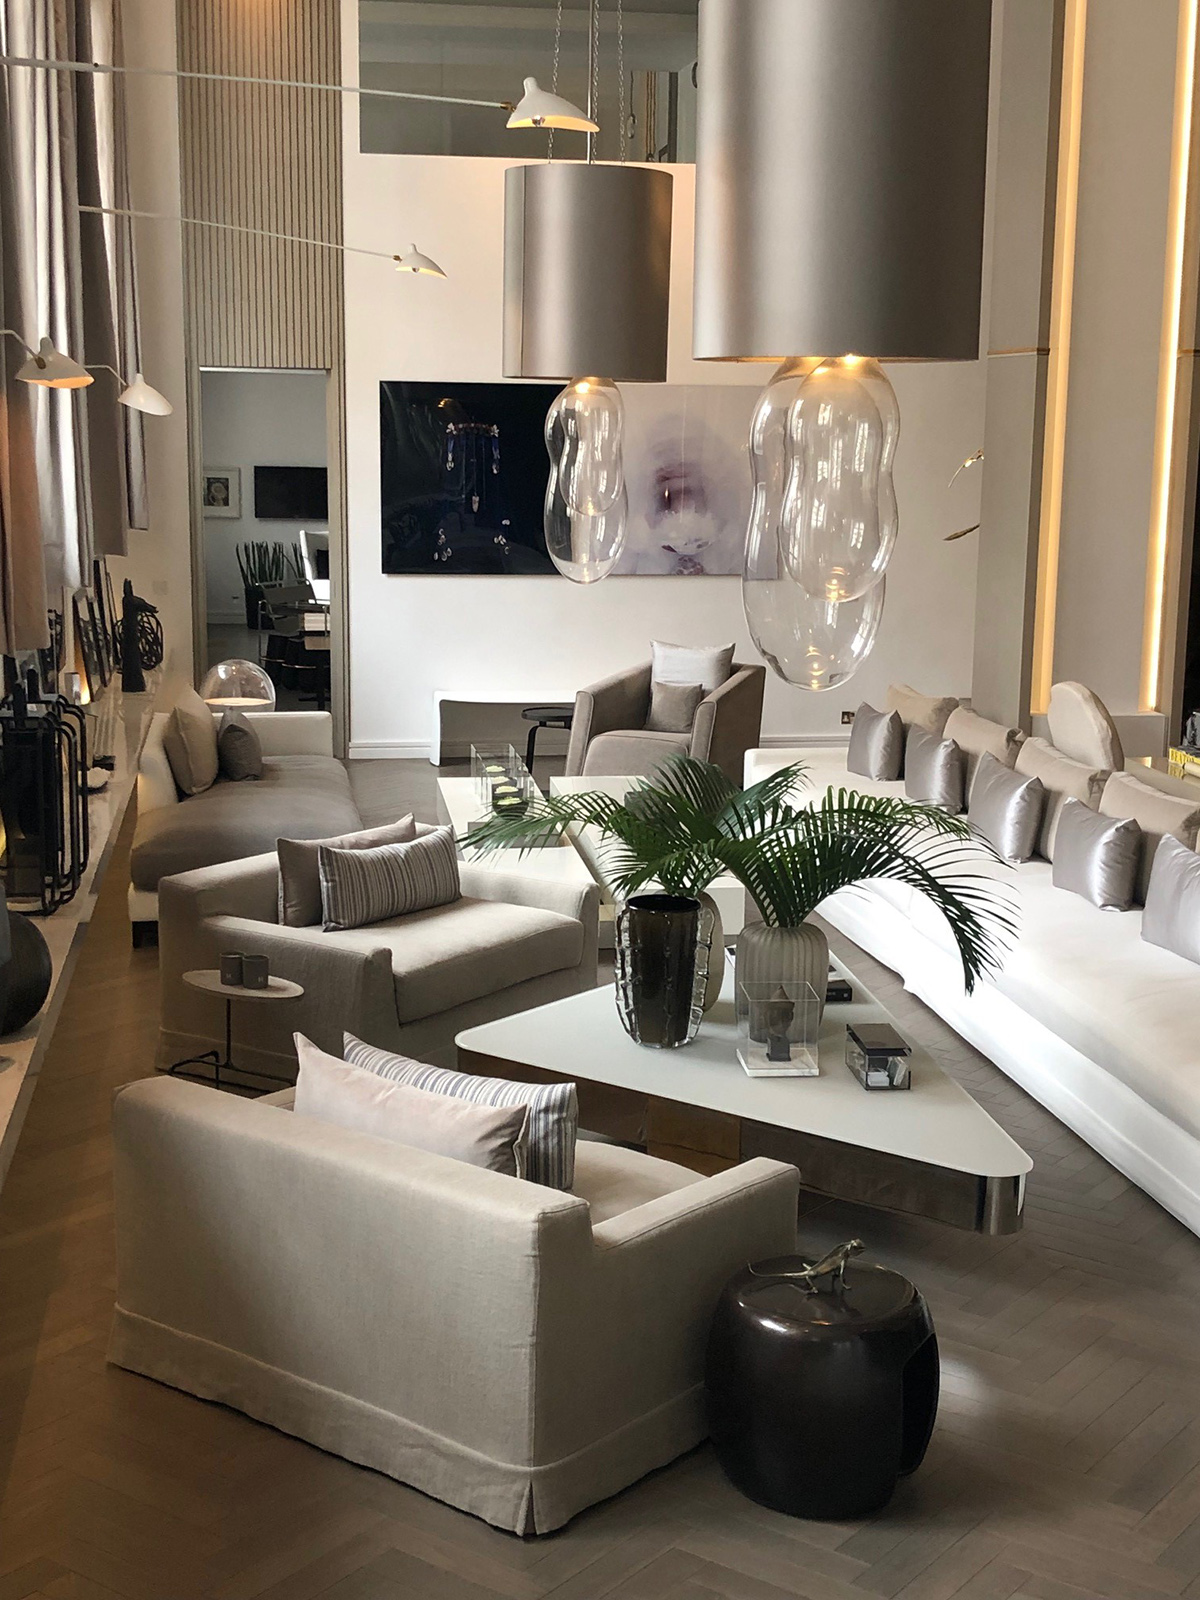 The open plan living room of interior designer Kelly hoppen includes large statement lighting and furniture in her signature taupe colour palette. Hear about the entire house tour on The Great Indoors Podcast. #kellyhoppen #openplan #sophierobinson